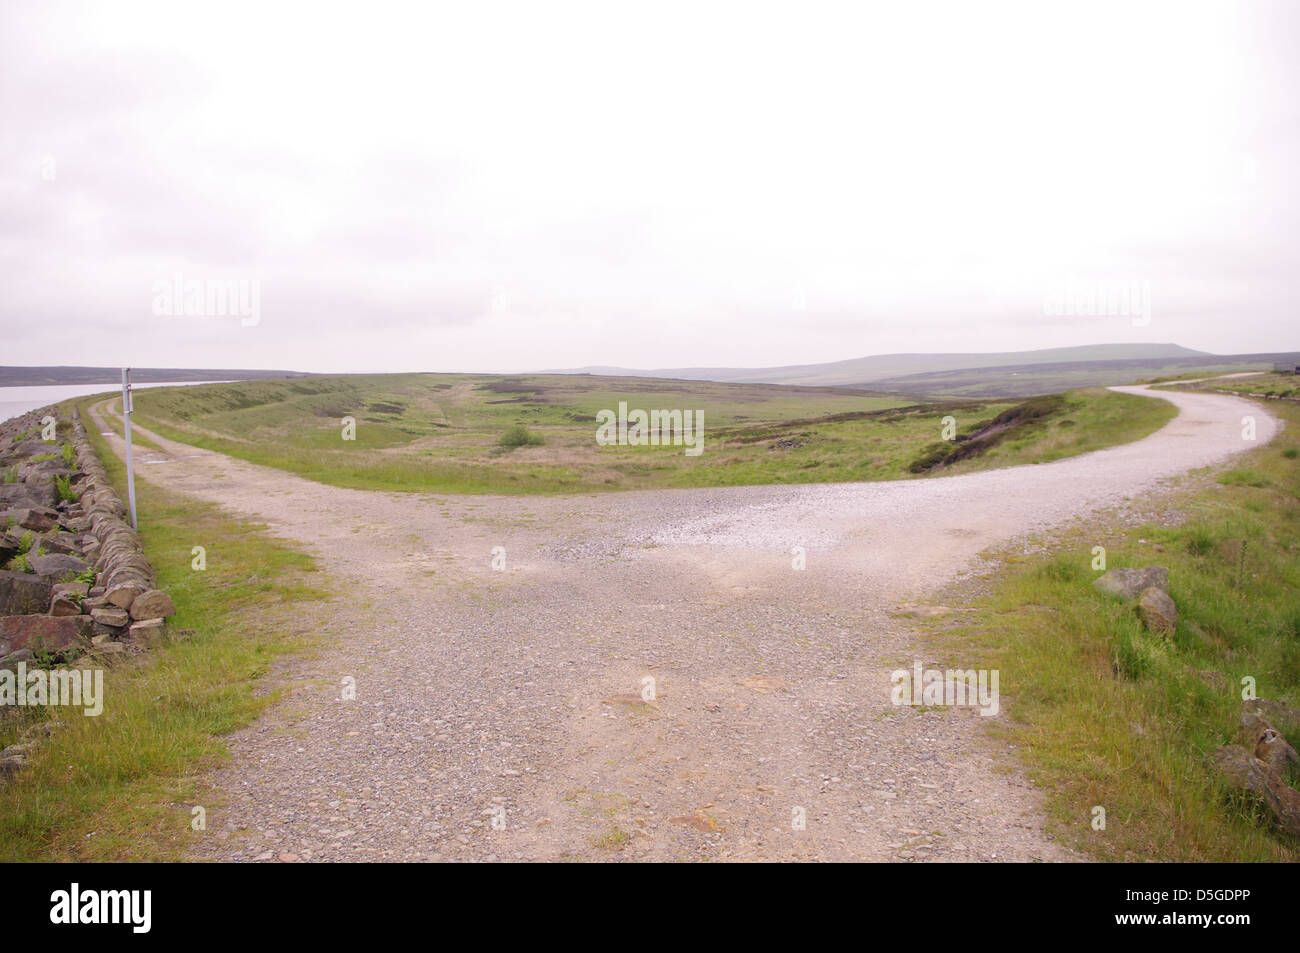 Landscape image taken on moorland between Cragg Vale and Littleborough Stock Photo